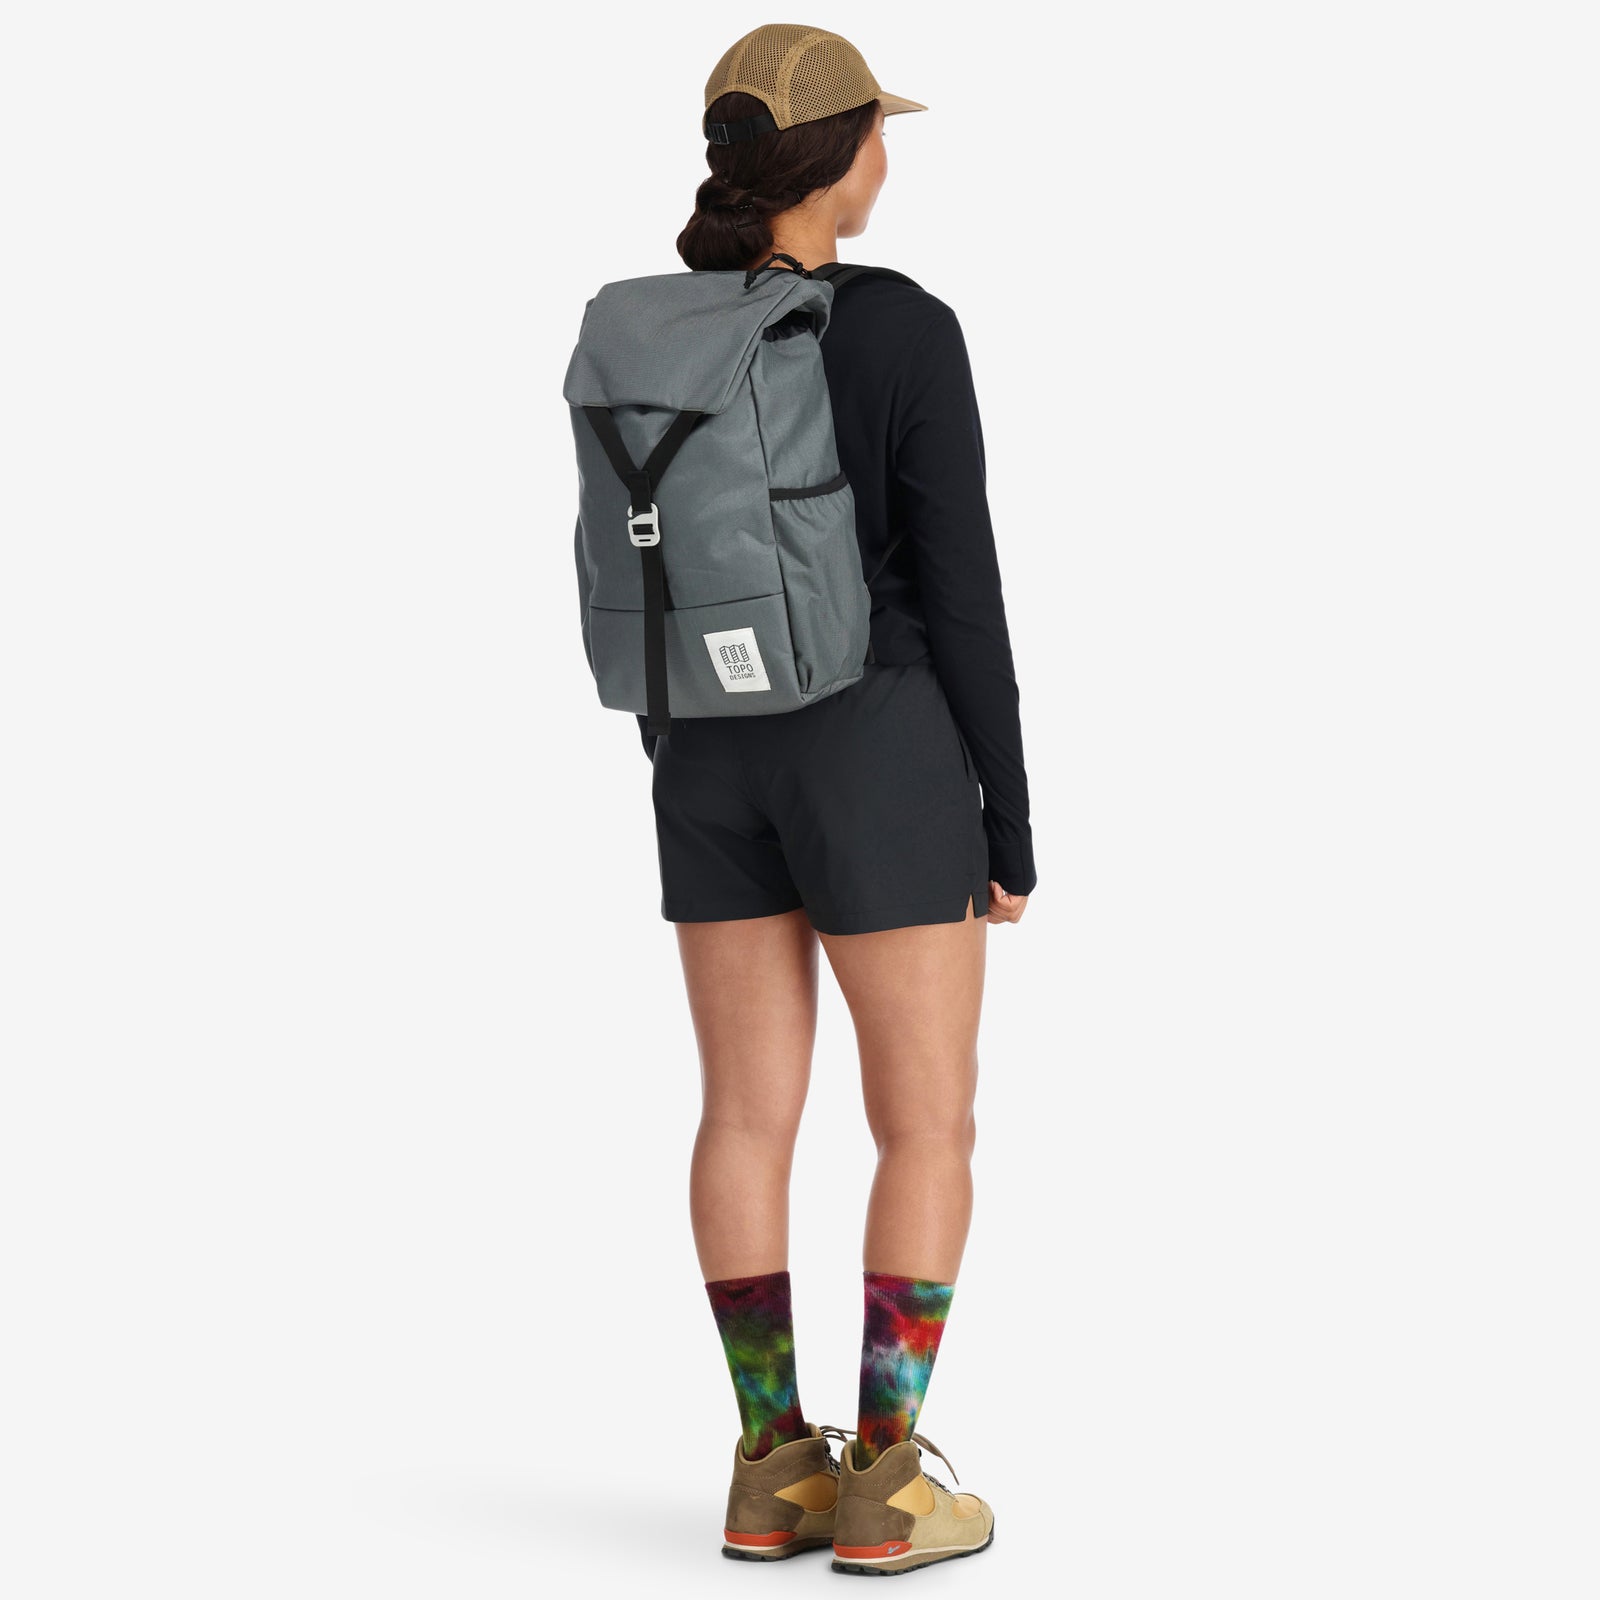 General shot of Topo Designs Y-Pack hiking backpack in charcoal gray on model.